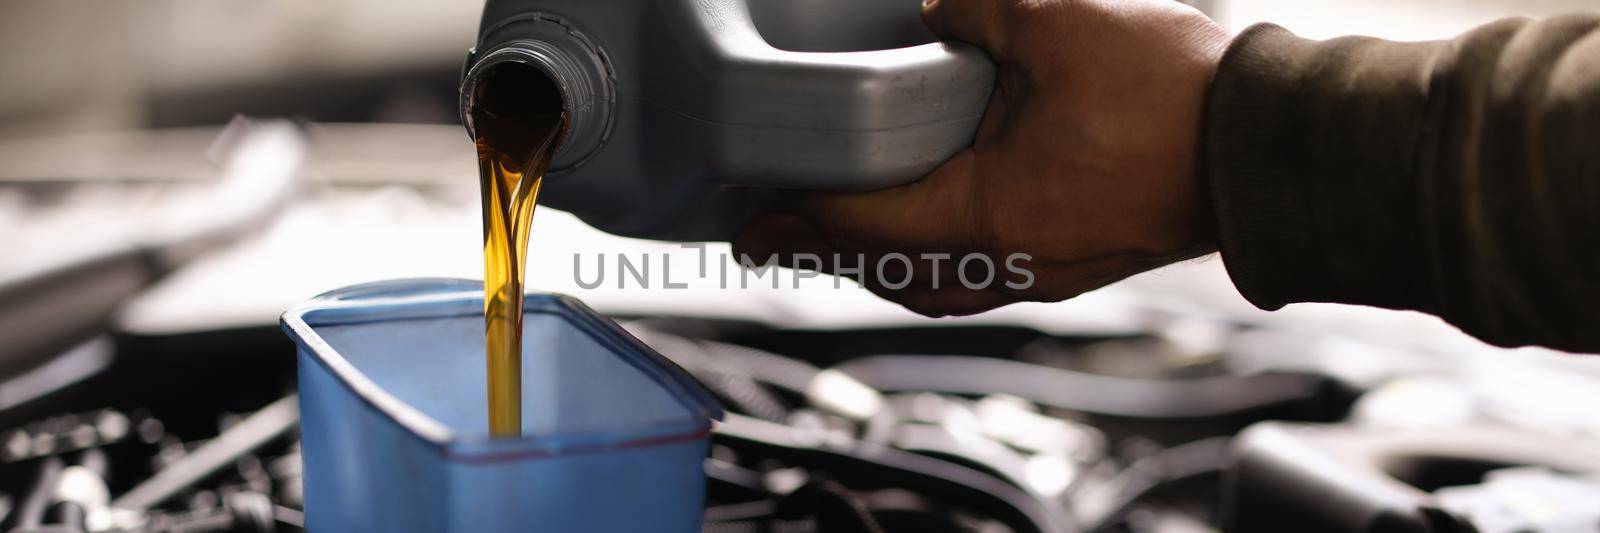 Foreman pours car oil into engine through watering can closeup by kuprevich